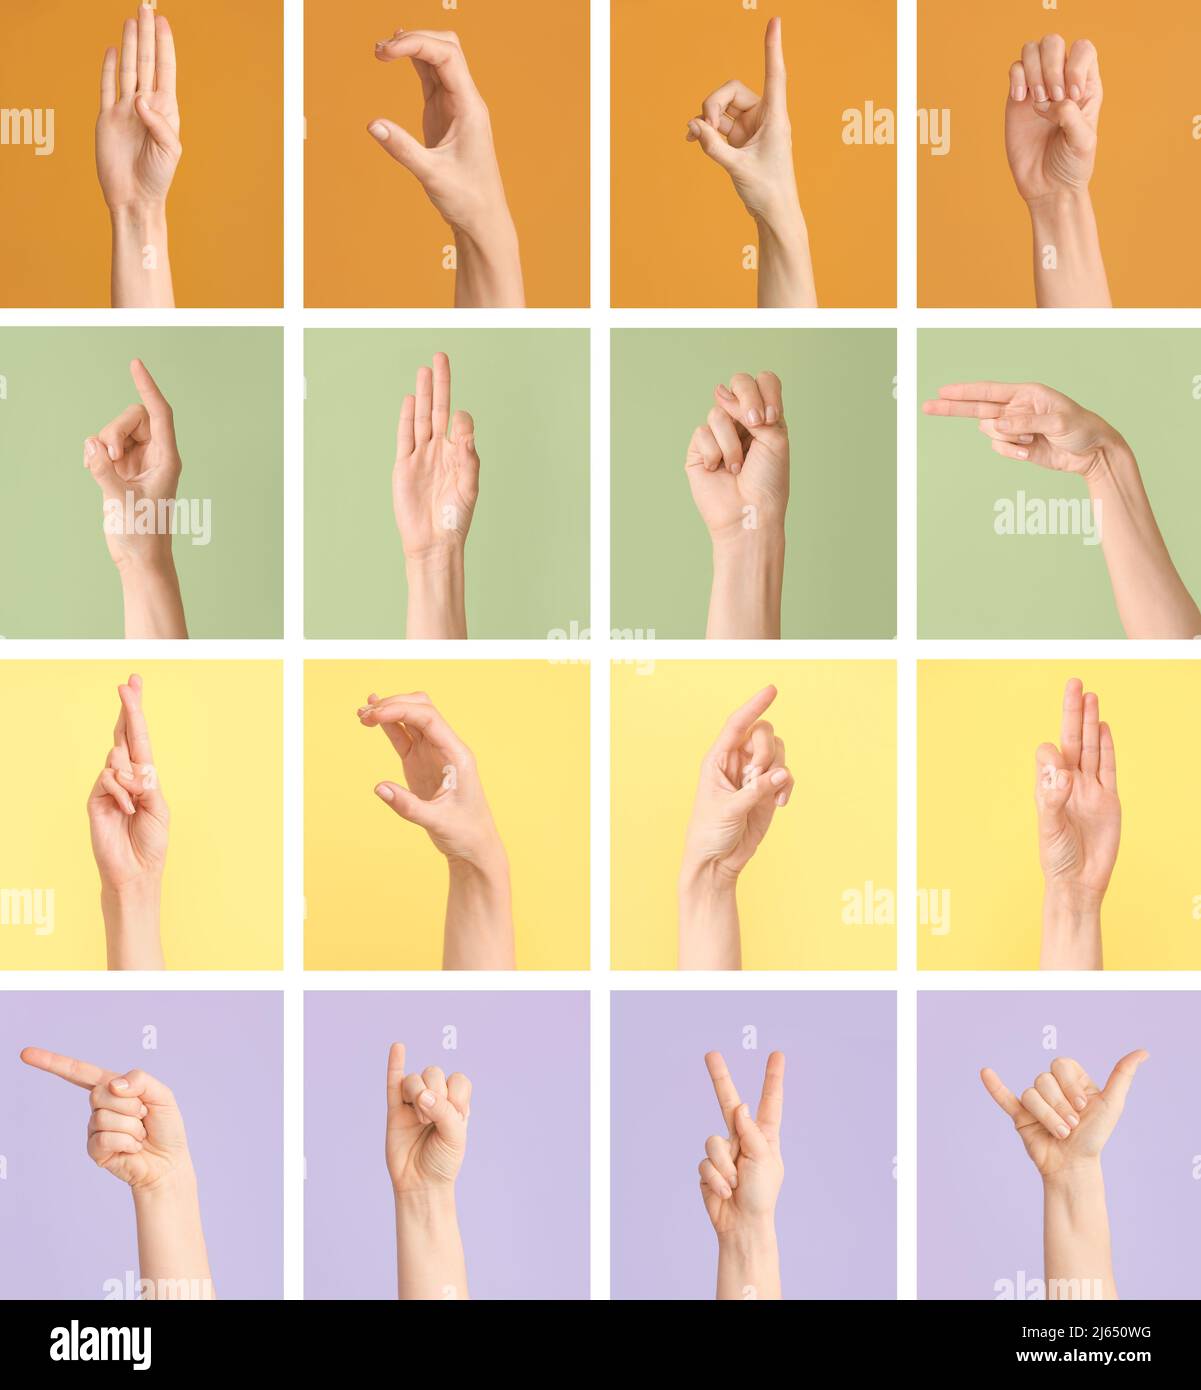 what color in sign language